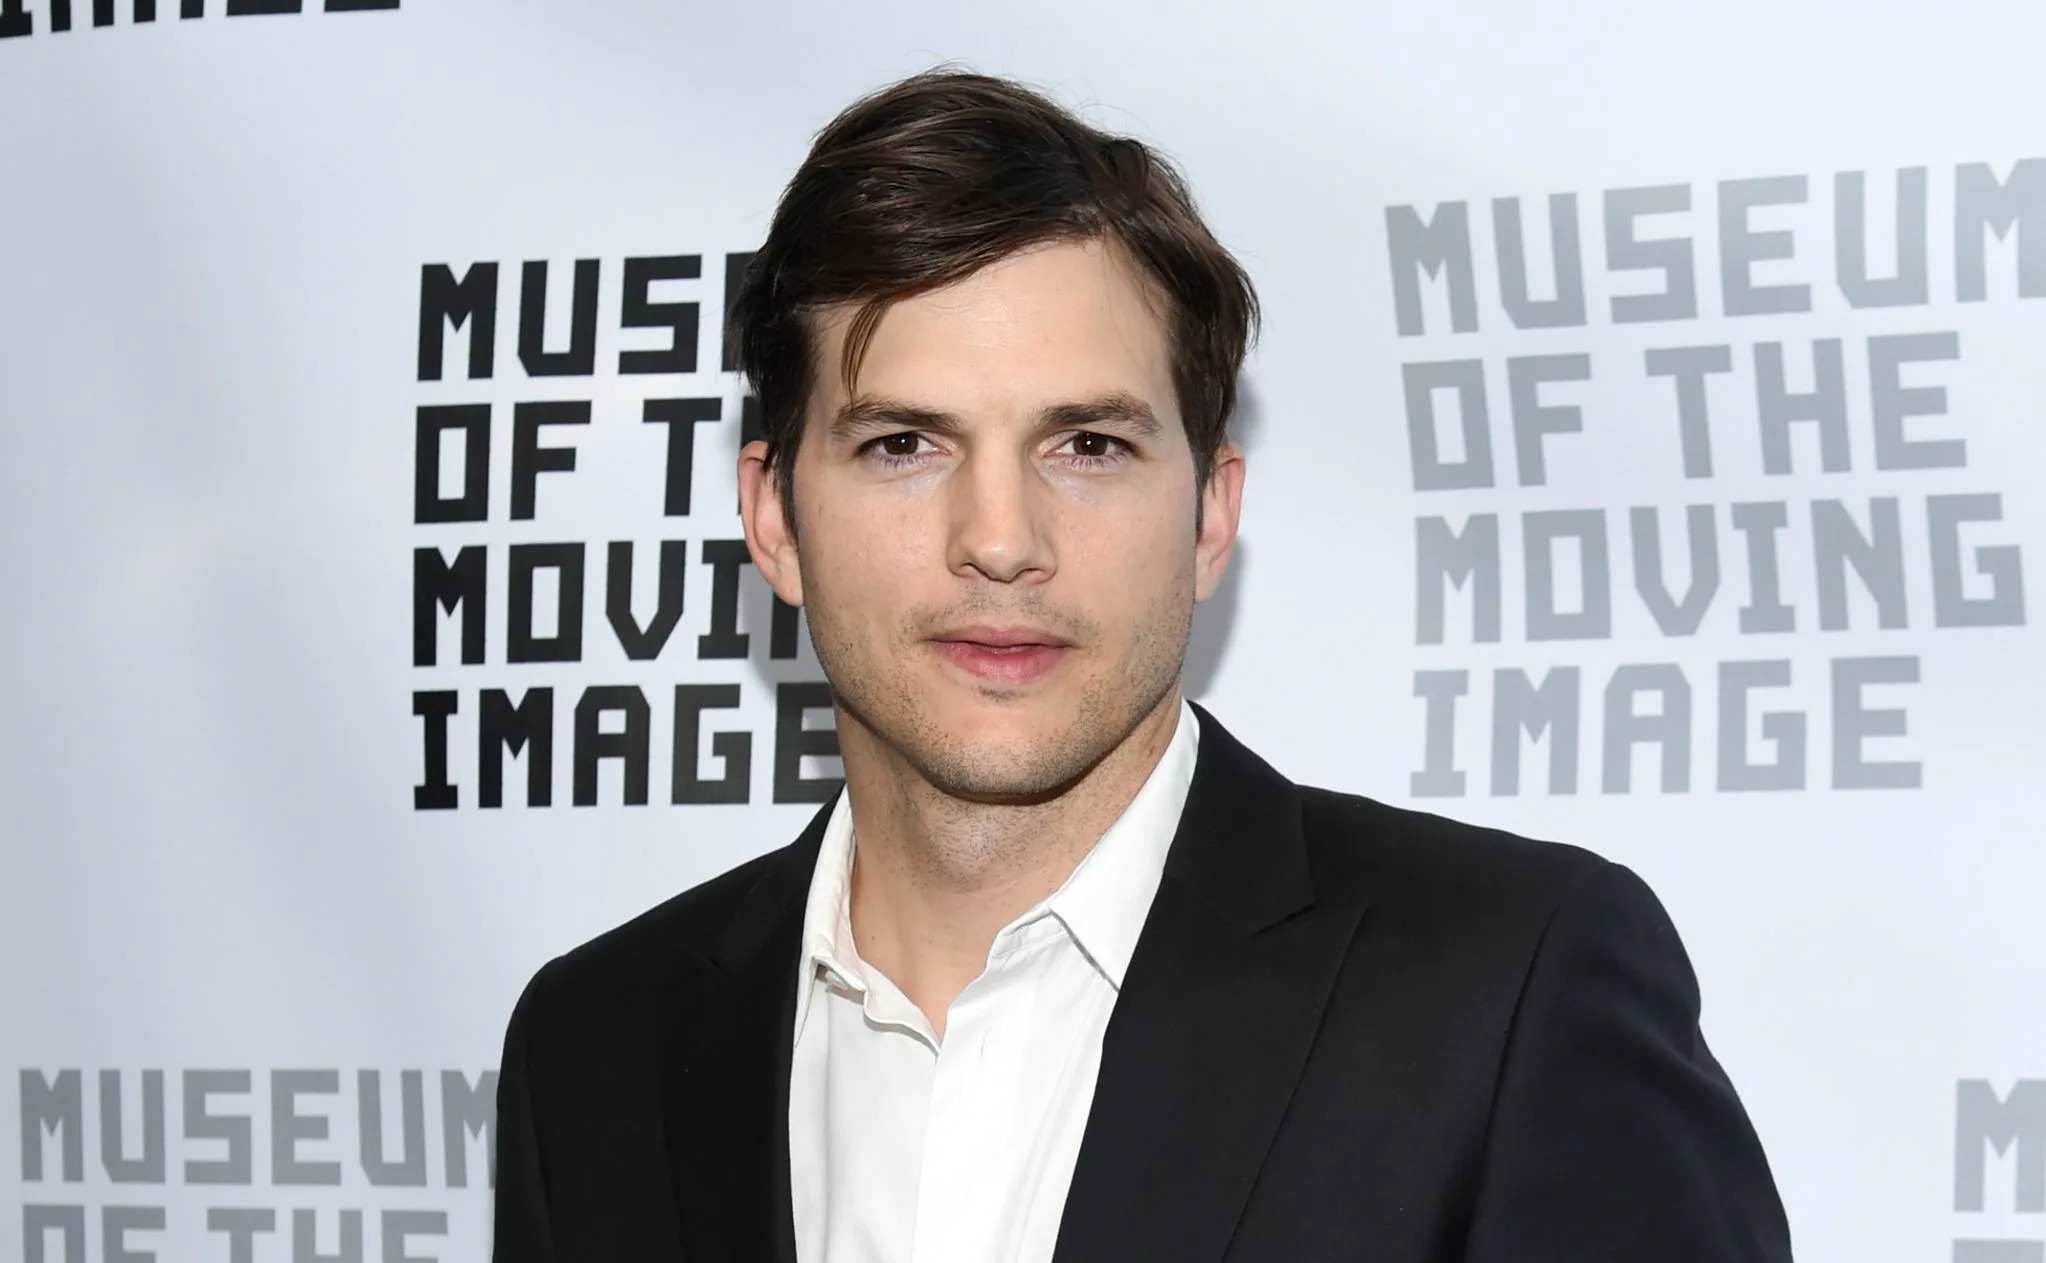 Ashton Kutcher wearing a black suit at Museum of the Moving Image